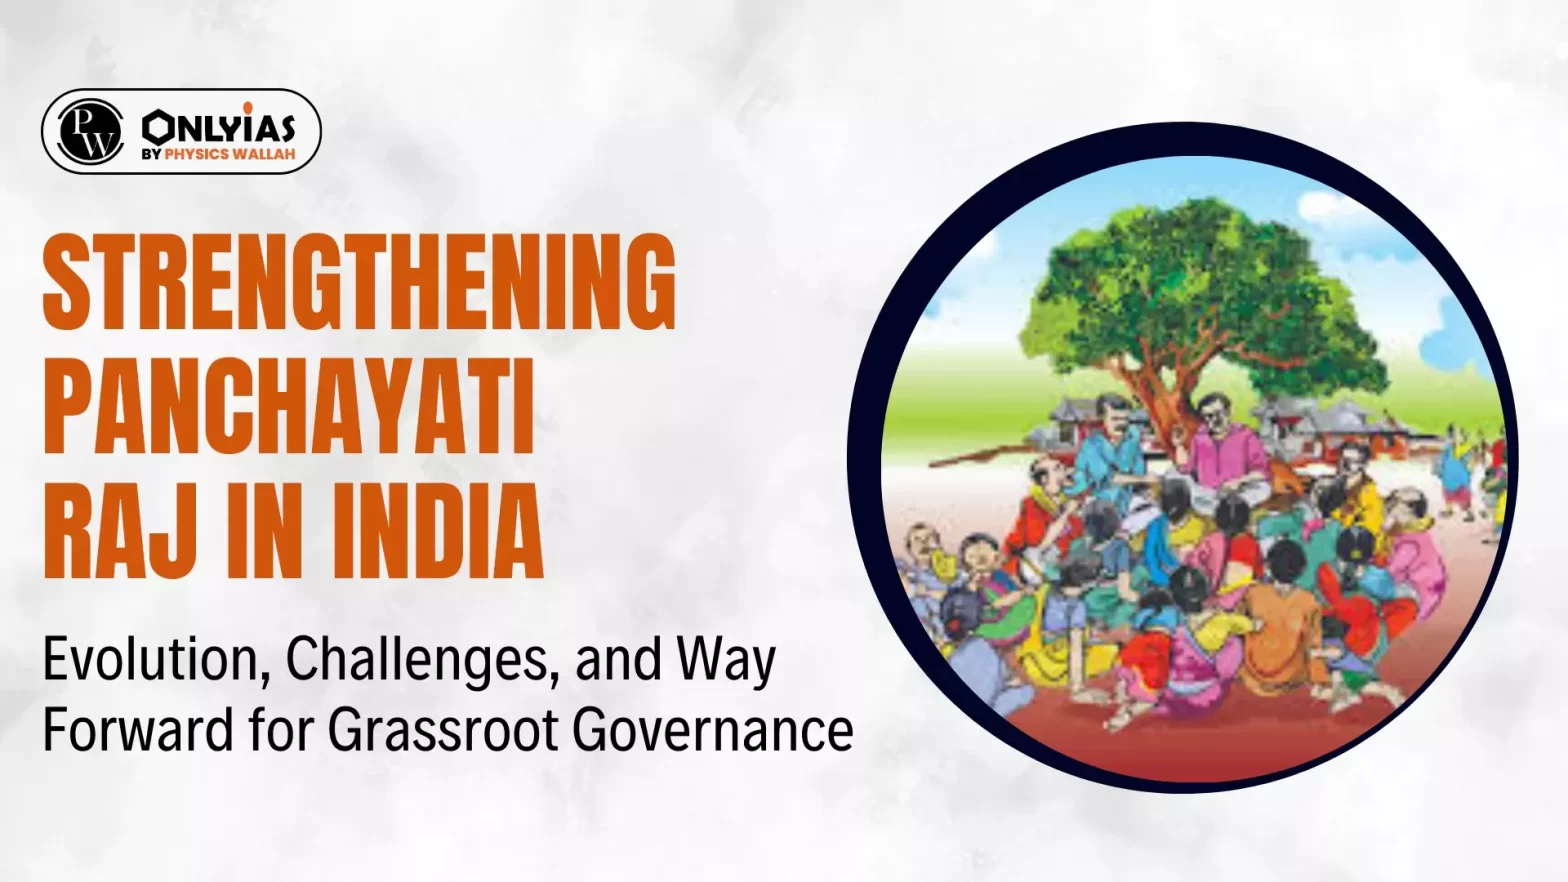 Strengthening Panchayati Raj in India: Evolution, Challenges, and Way Forward for Grassroot Governance